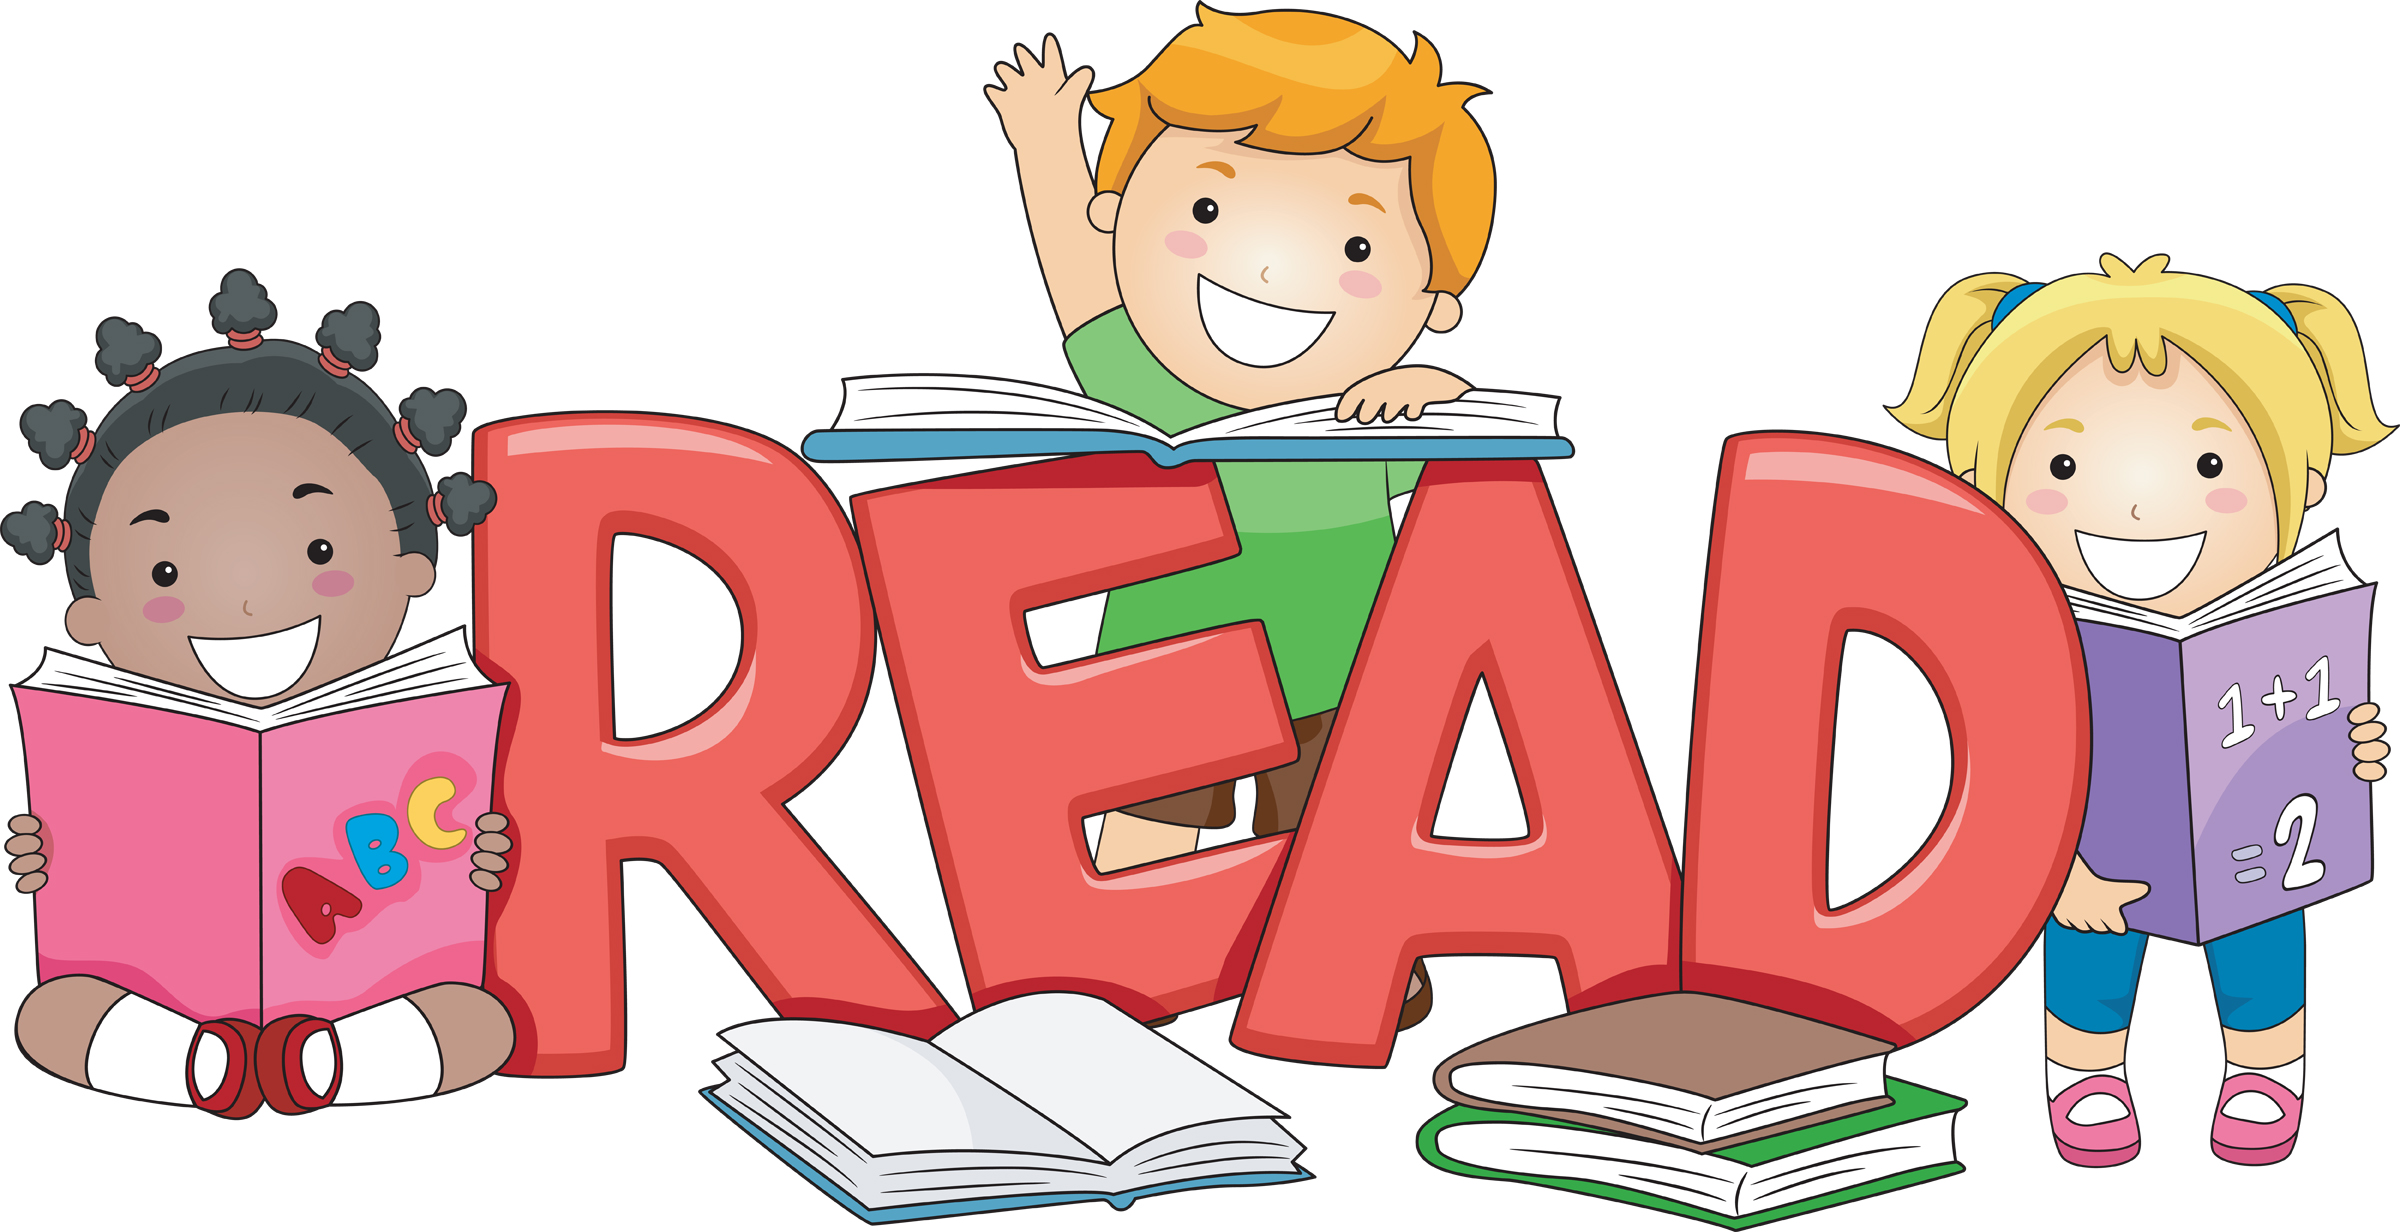 Kid reading reading group clipart 2